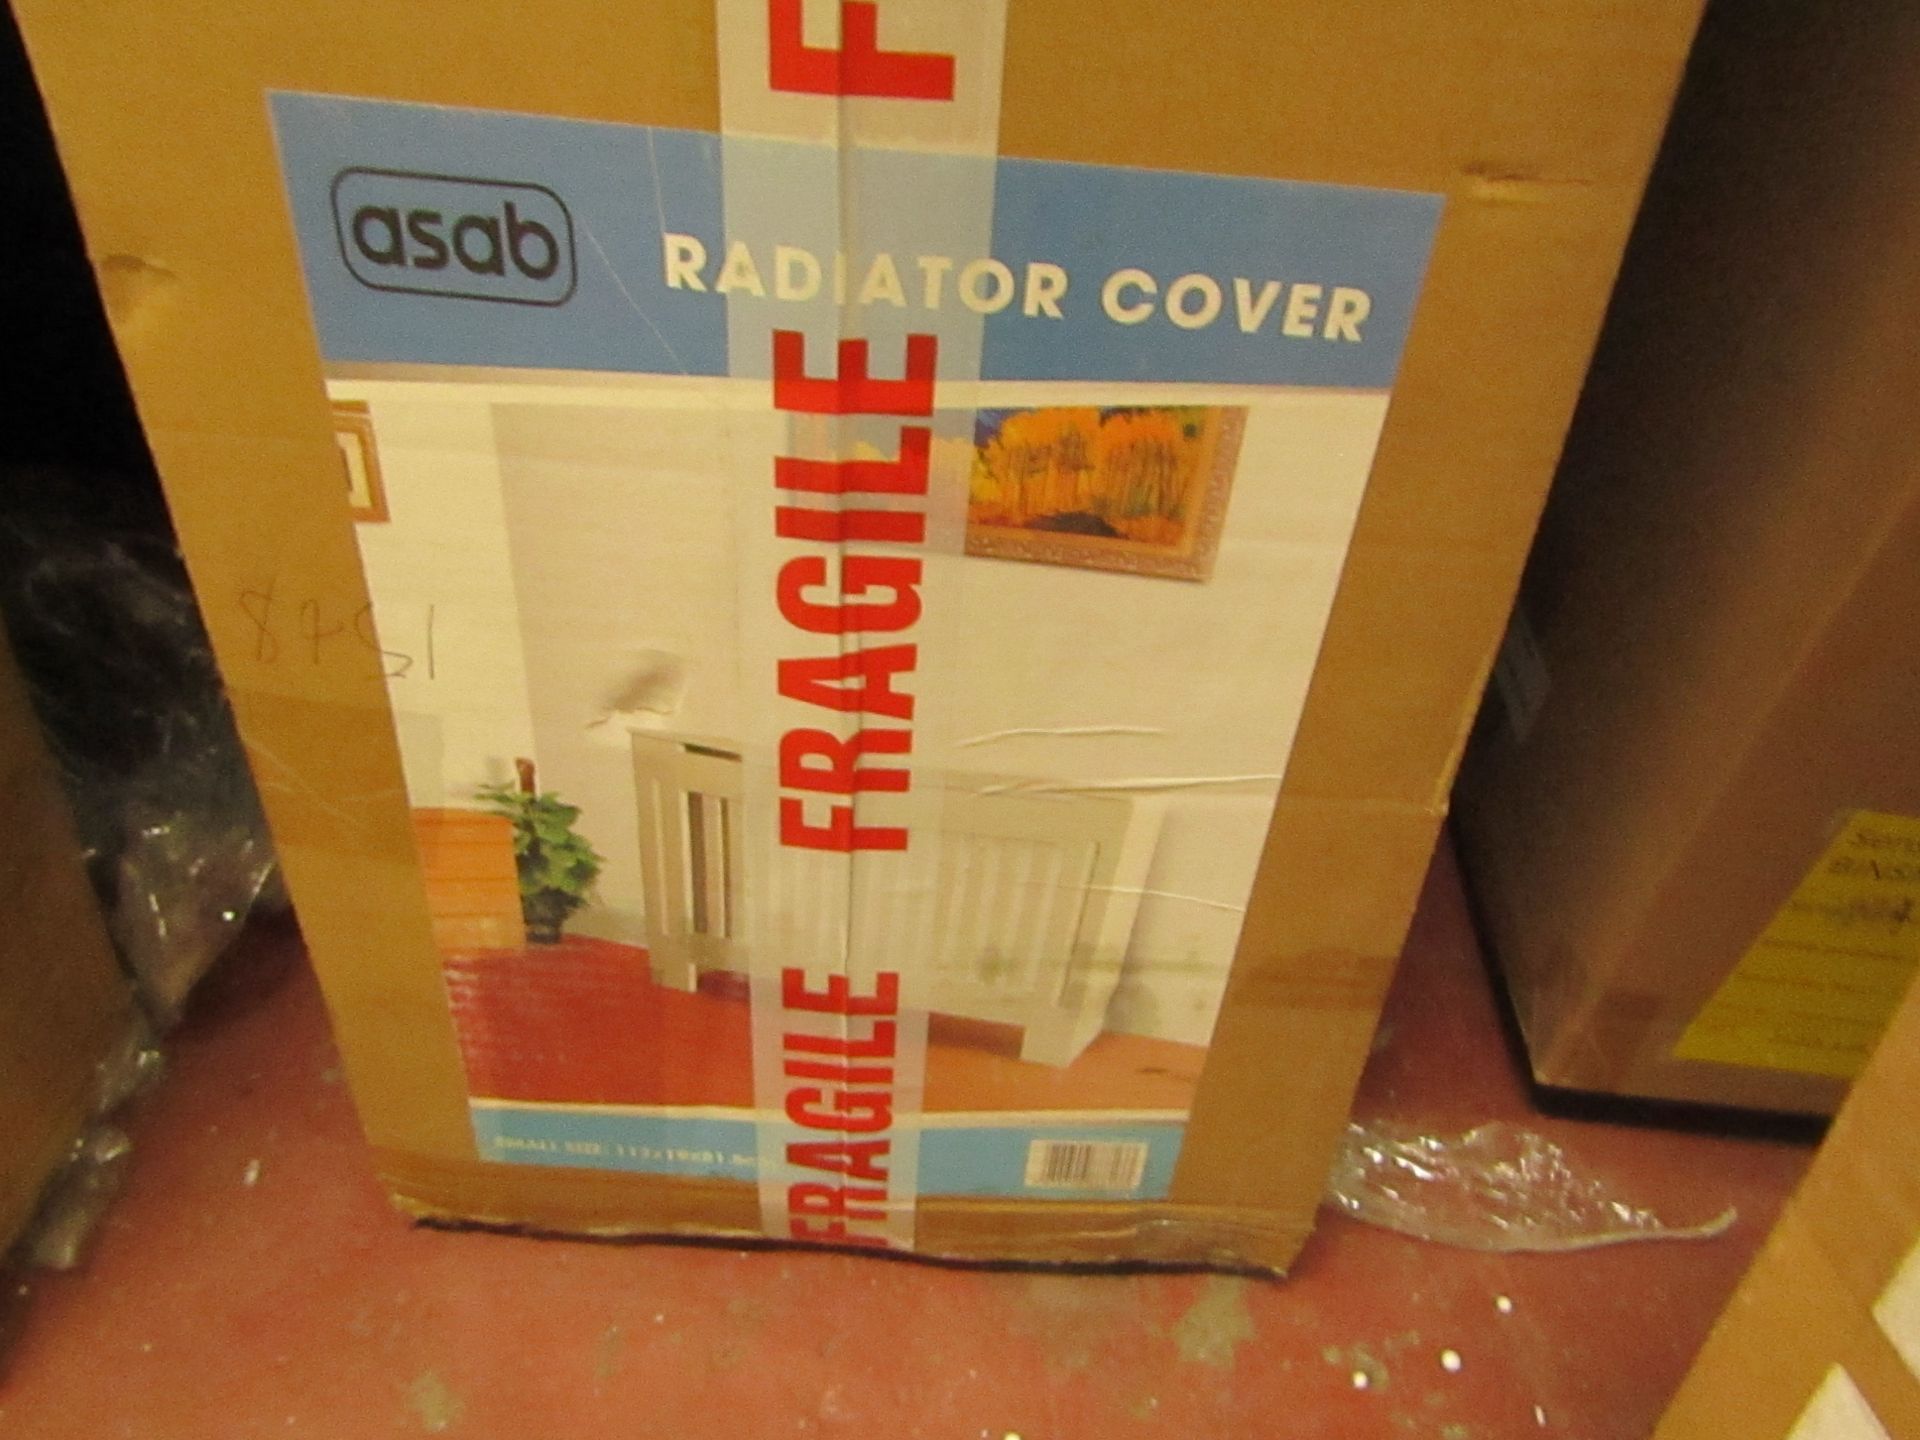 Asab Radiator Cover.112cm x 19cm x 81.5cm. Boxed but unchecked